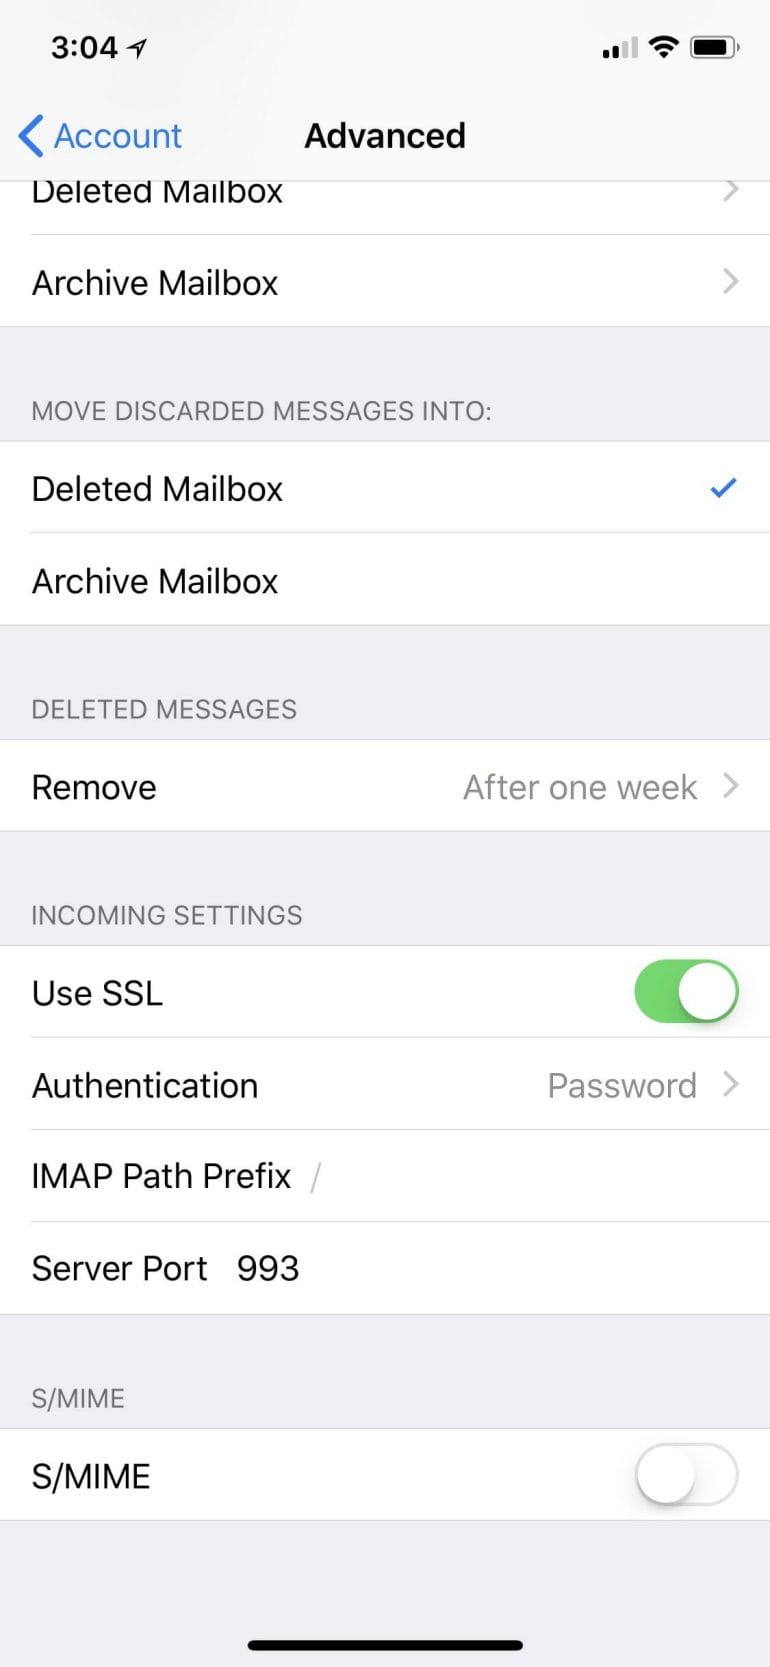 iOS email account settings for incoming (IMAP) mail server